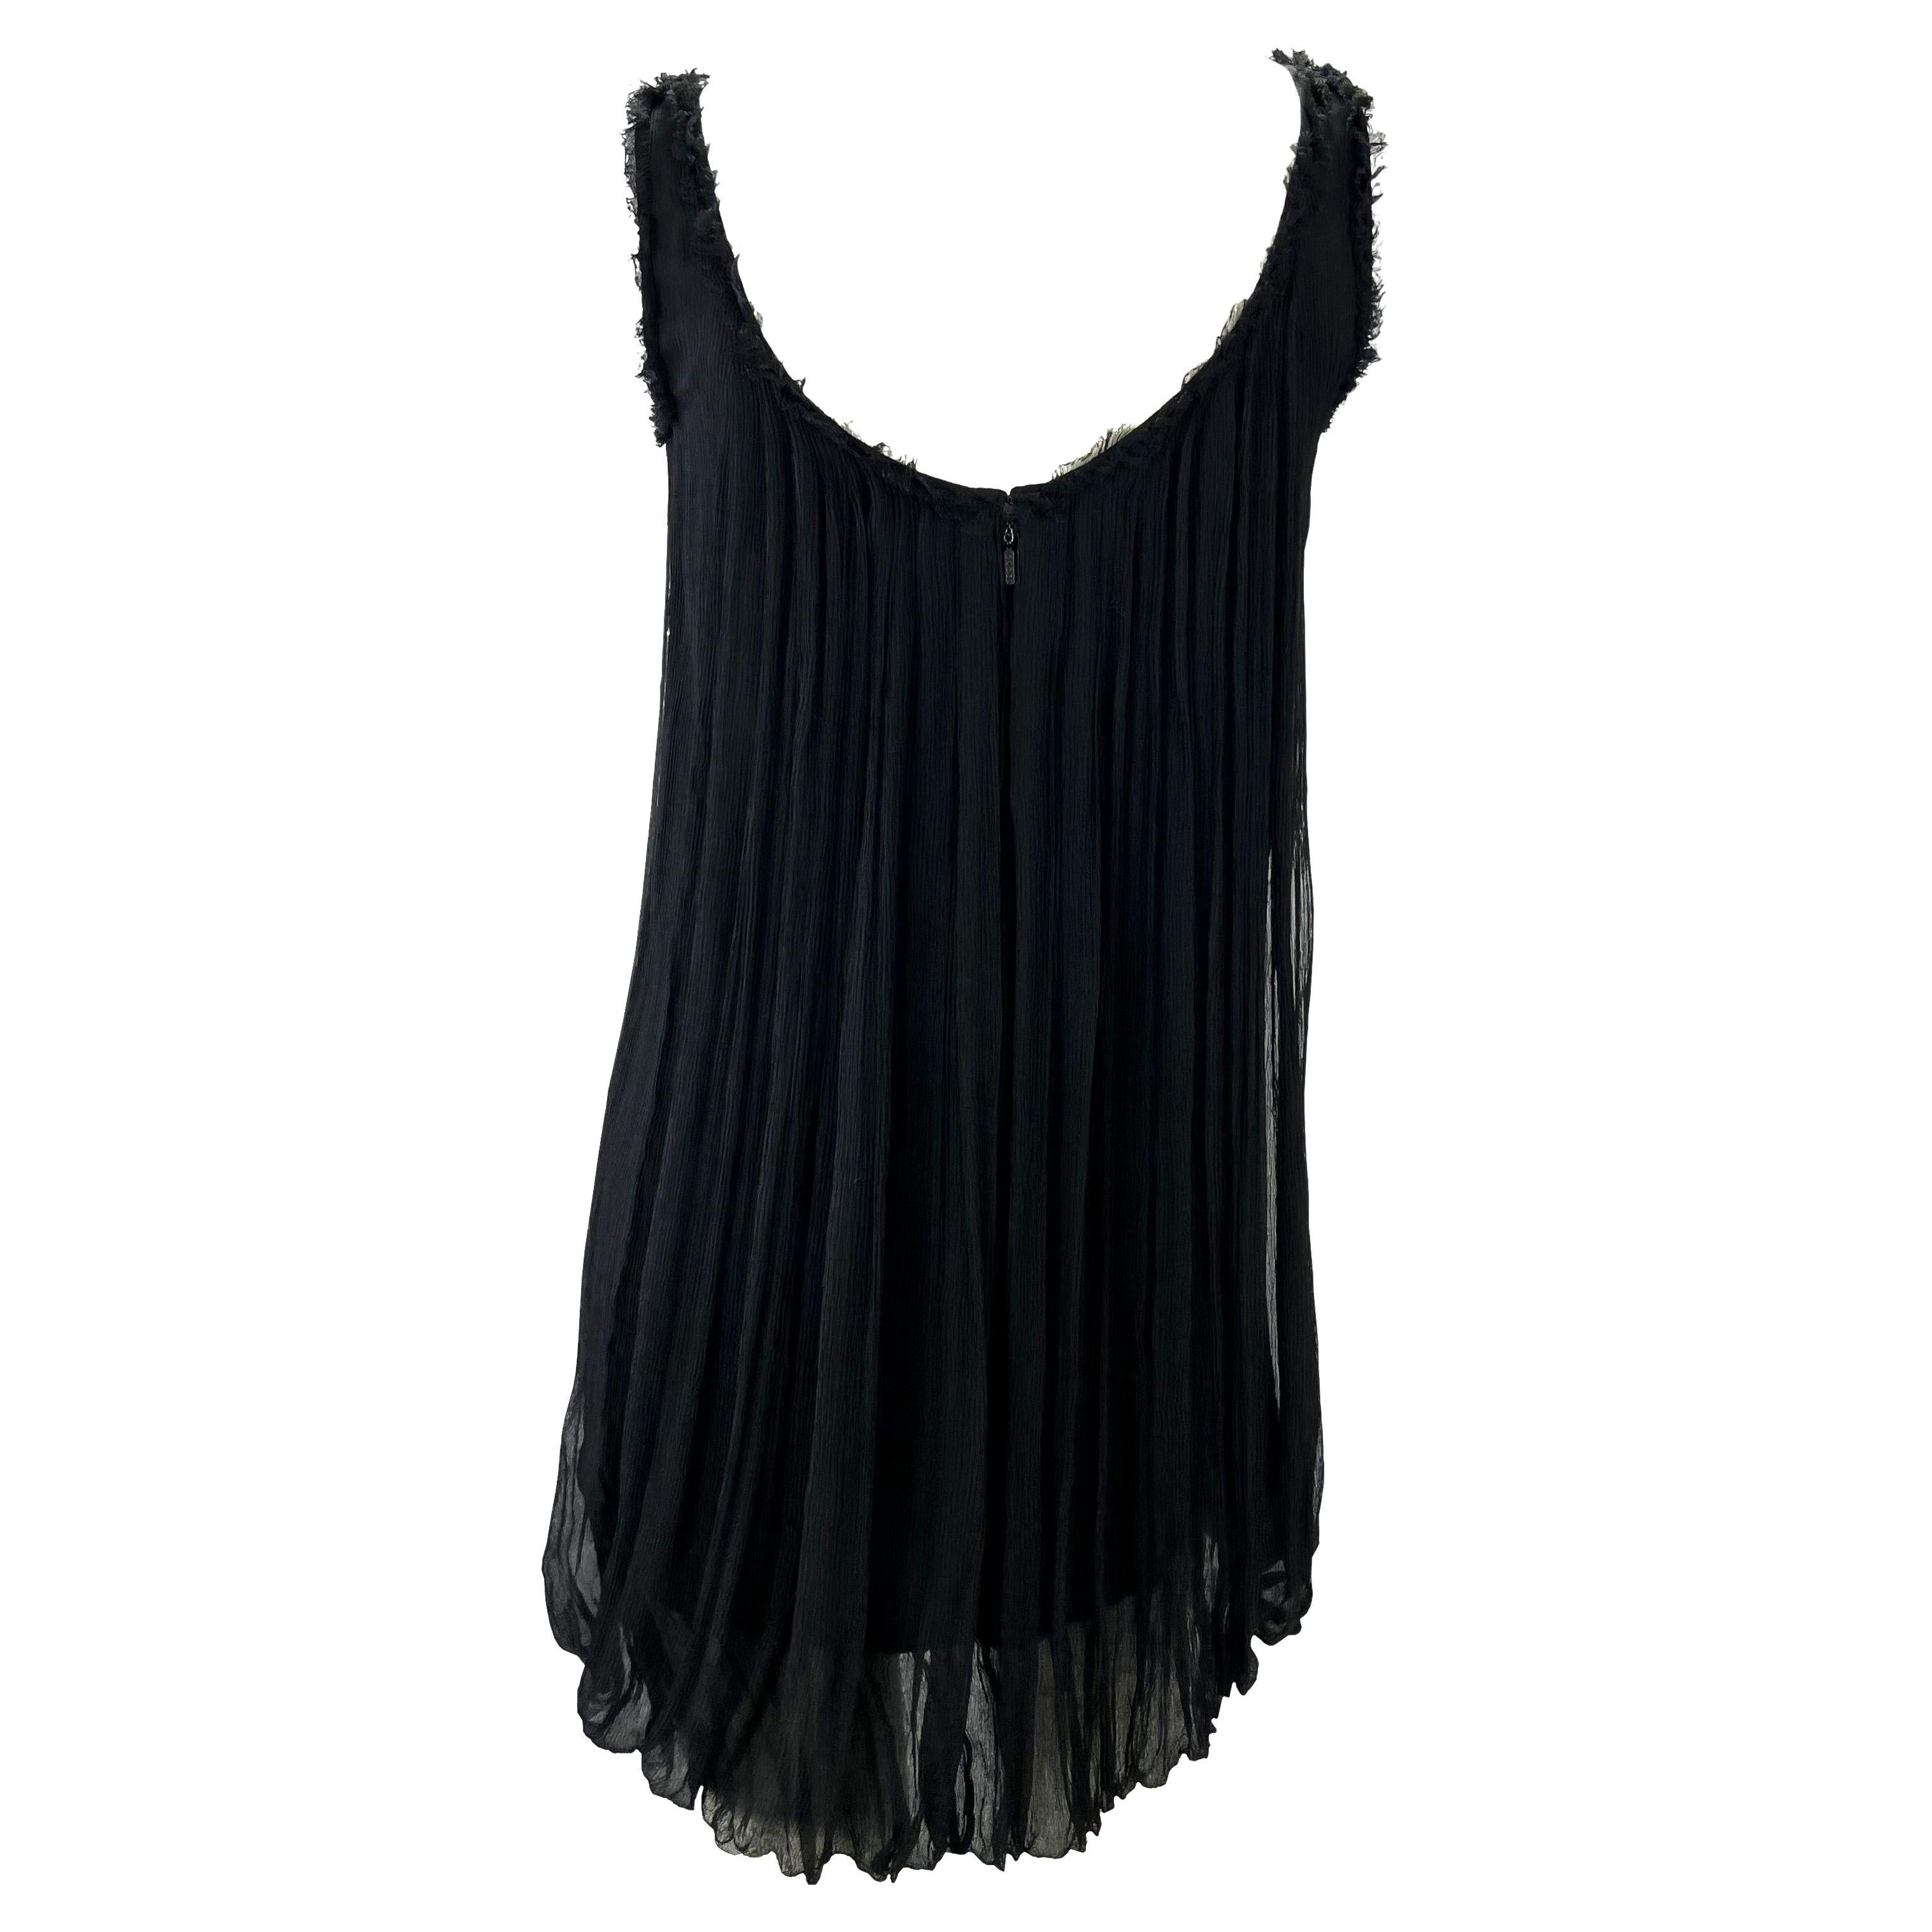 F/W 2001 Gucci by Tom Ford Black Tulle Sleeveless Shift Dress For Sale 1